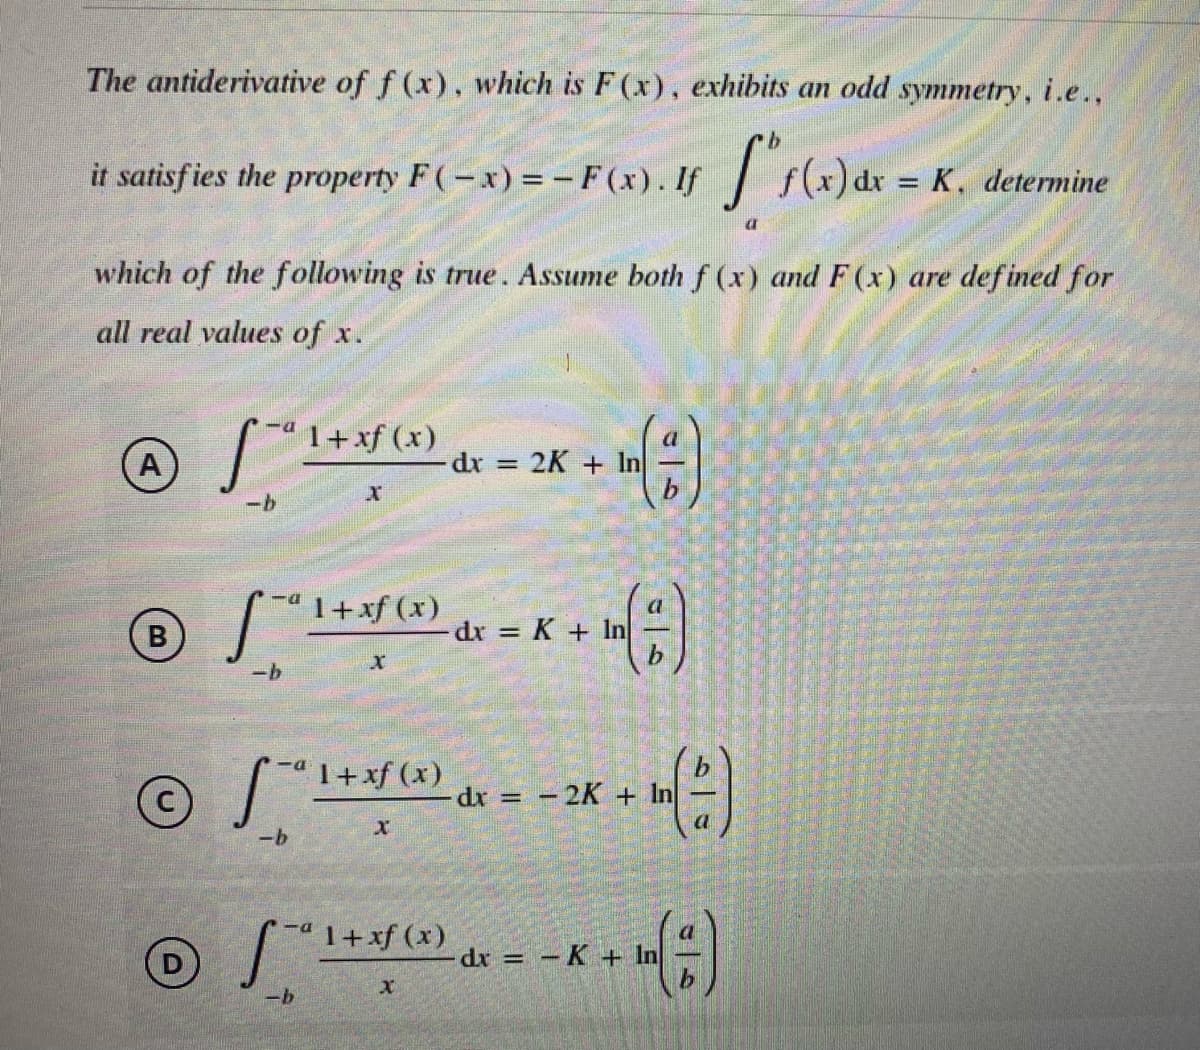 The antiderivative of f (x), which is F(x), exhibits an odd symmetry, i.e.,
9.
satisfies the property F(-x)=- F(x). If f(x)dr = K, determine
it
%3D
which of the following is true. Assume both f (x) and F(x) are defined for
all real values of x.
"1+xf (x)
dr
A
2K + In
%3D
“ 1+xf (x)
-dx K + 1
"1+xf (x)
-dx = -2K + In
-b
"1+xf (x)
dr =
-K+In
